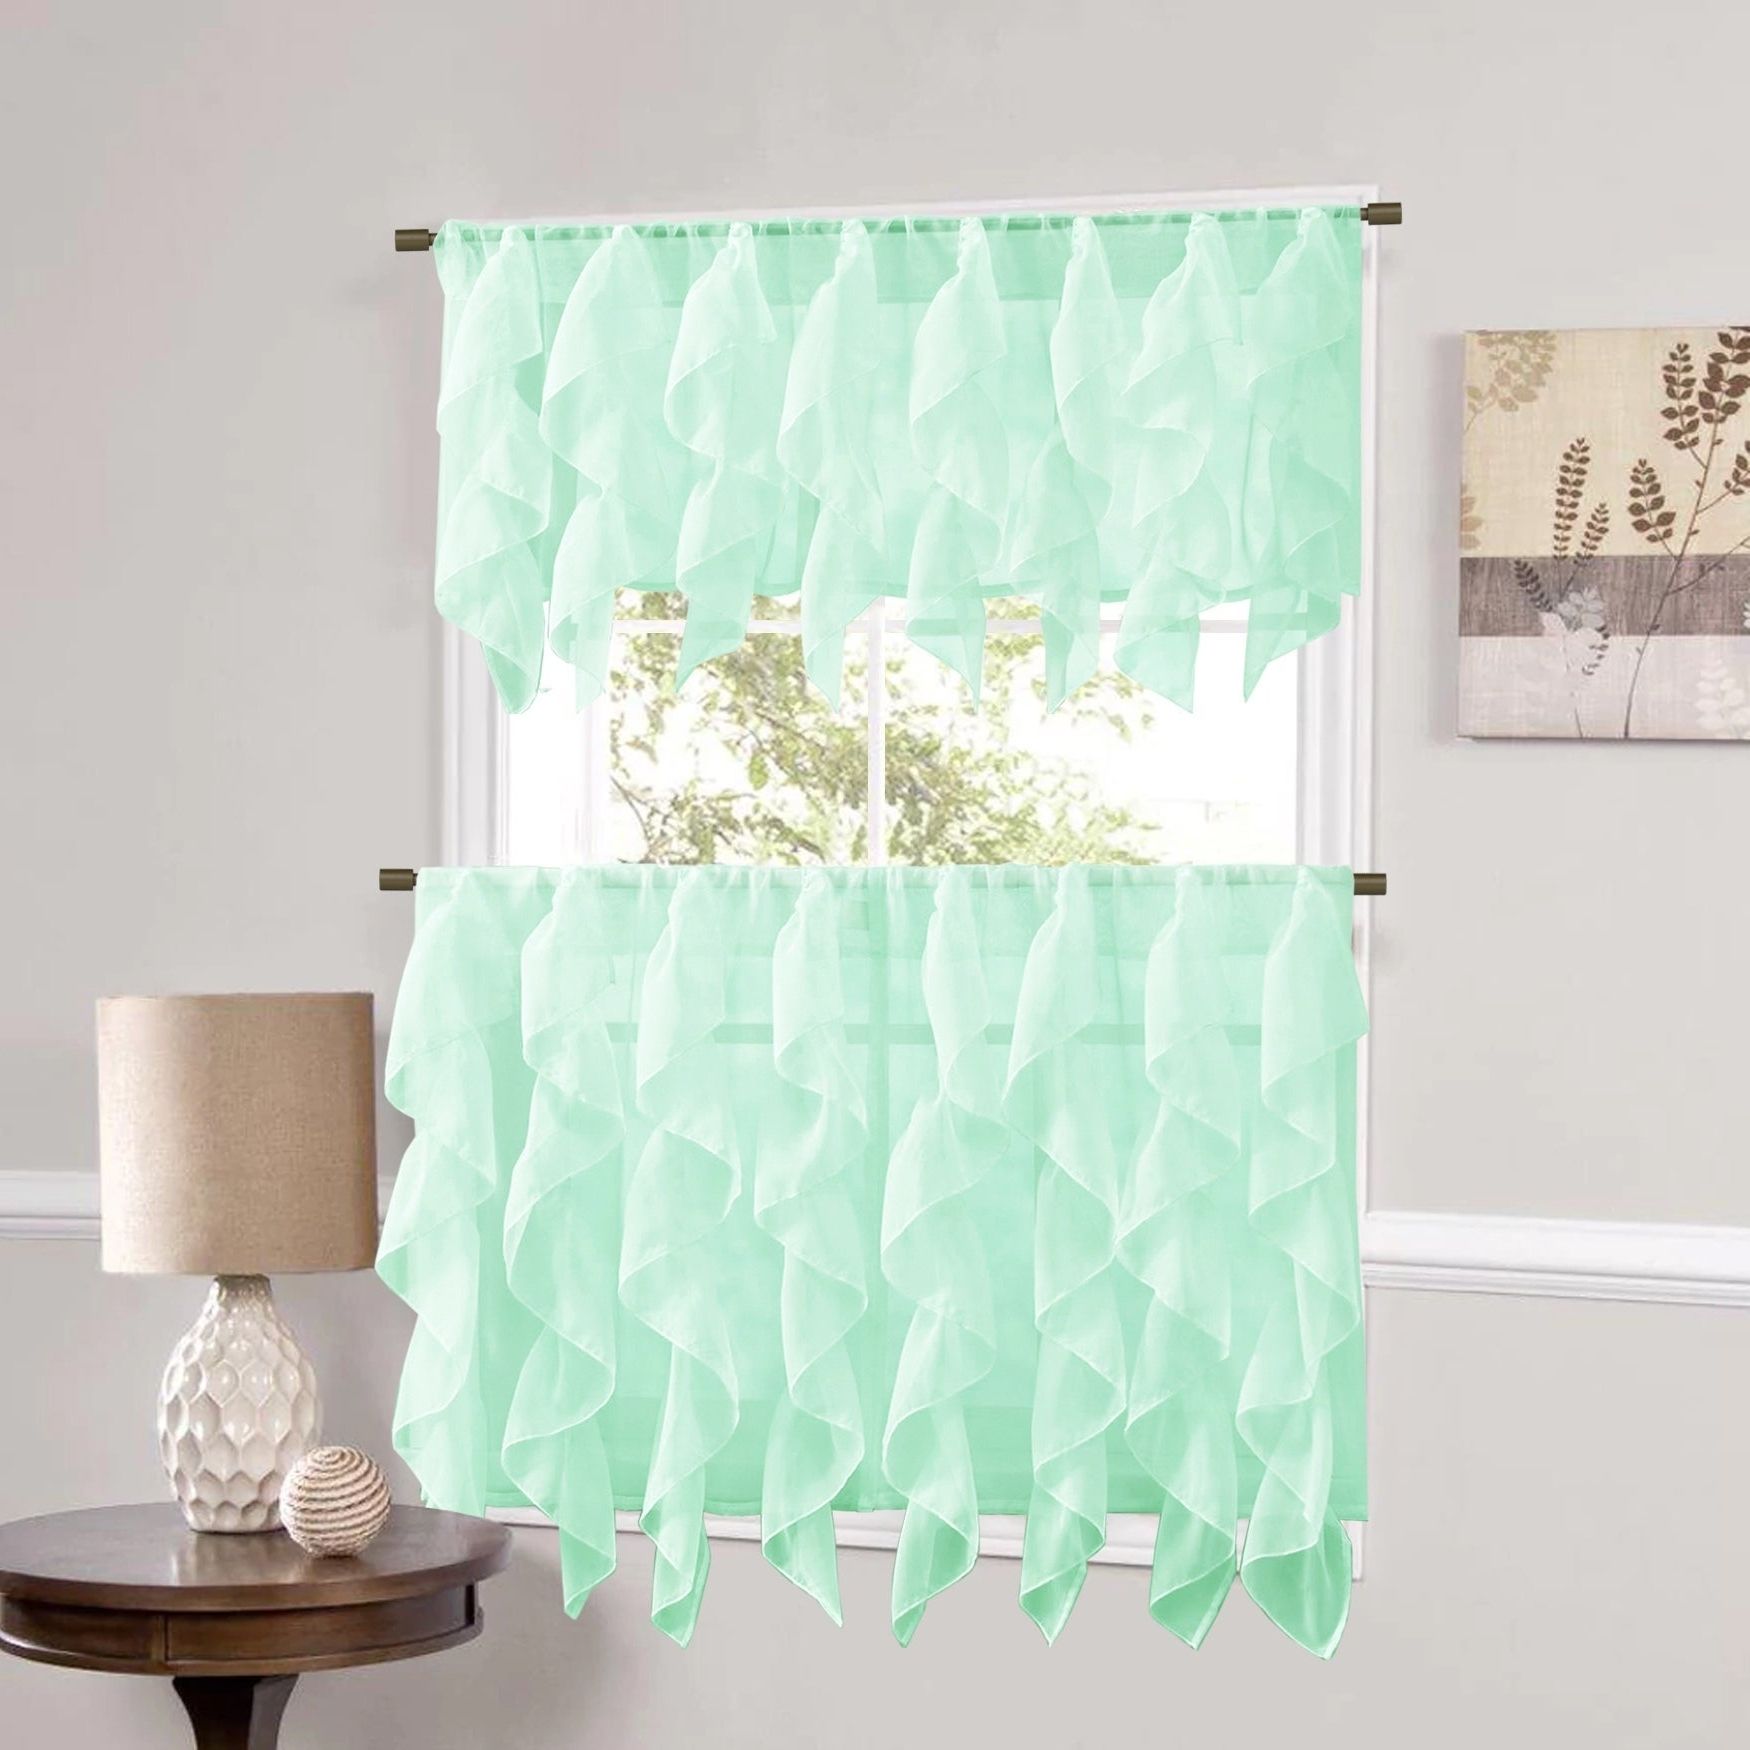 Newest Sweet Home Collection Mint Vertical Ruffled Waterfall Valance And Curtain  Tiers Within Navy Vertical Ruffled Waterfall Valance And Curtain Tiers (View 4 of 20)